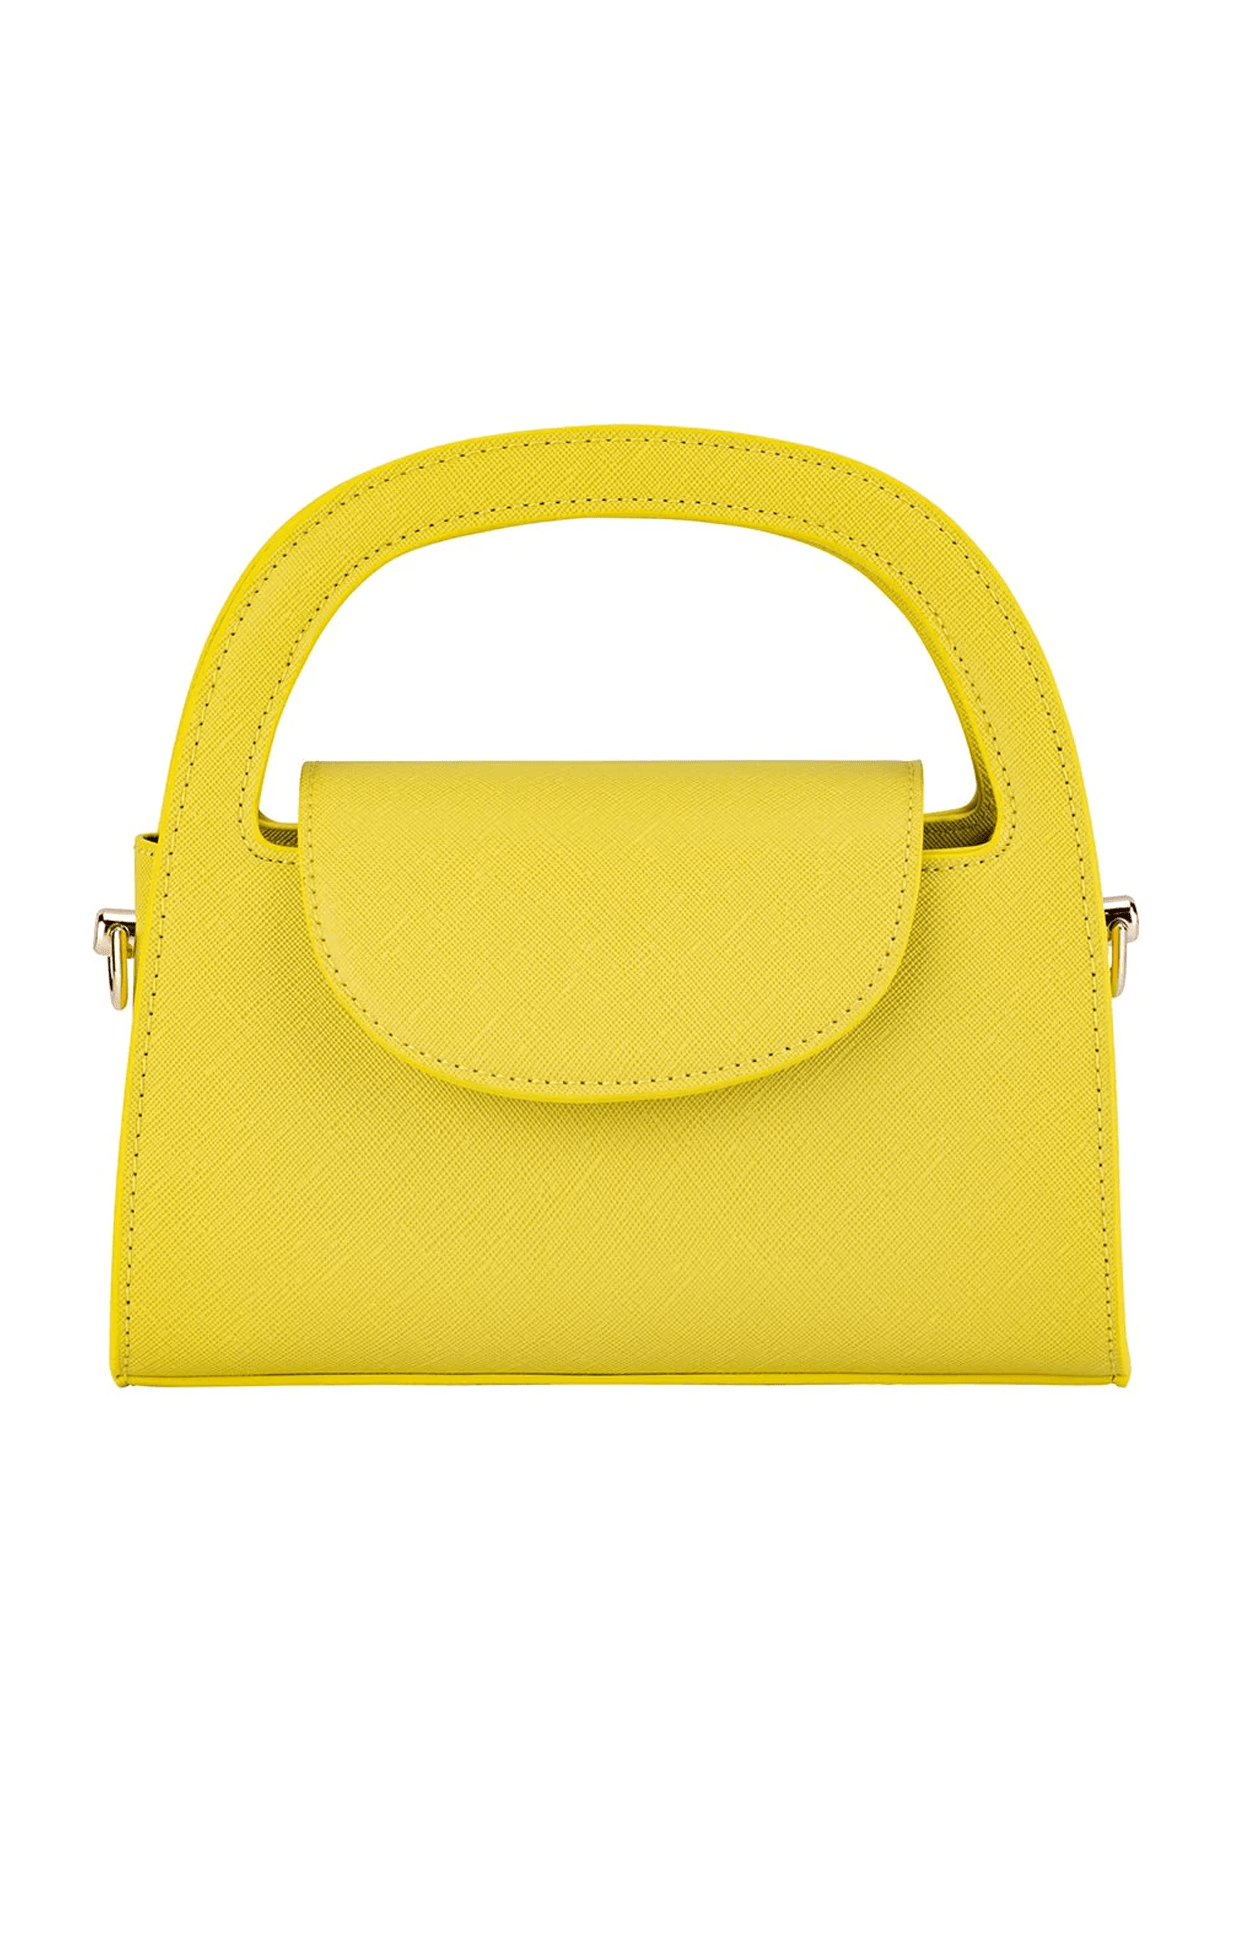 Multi Occasion OS / YELLOW IVY CURVED HANDLE BAG IN YELLOW